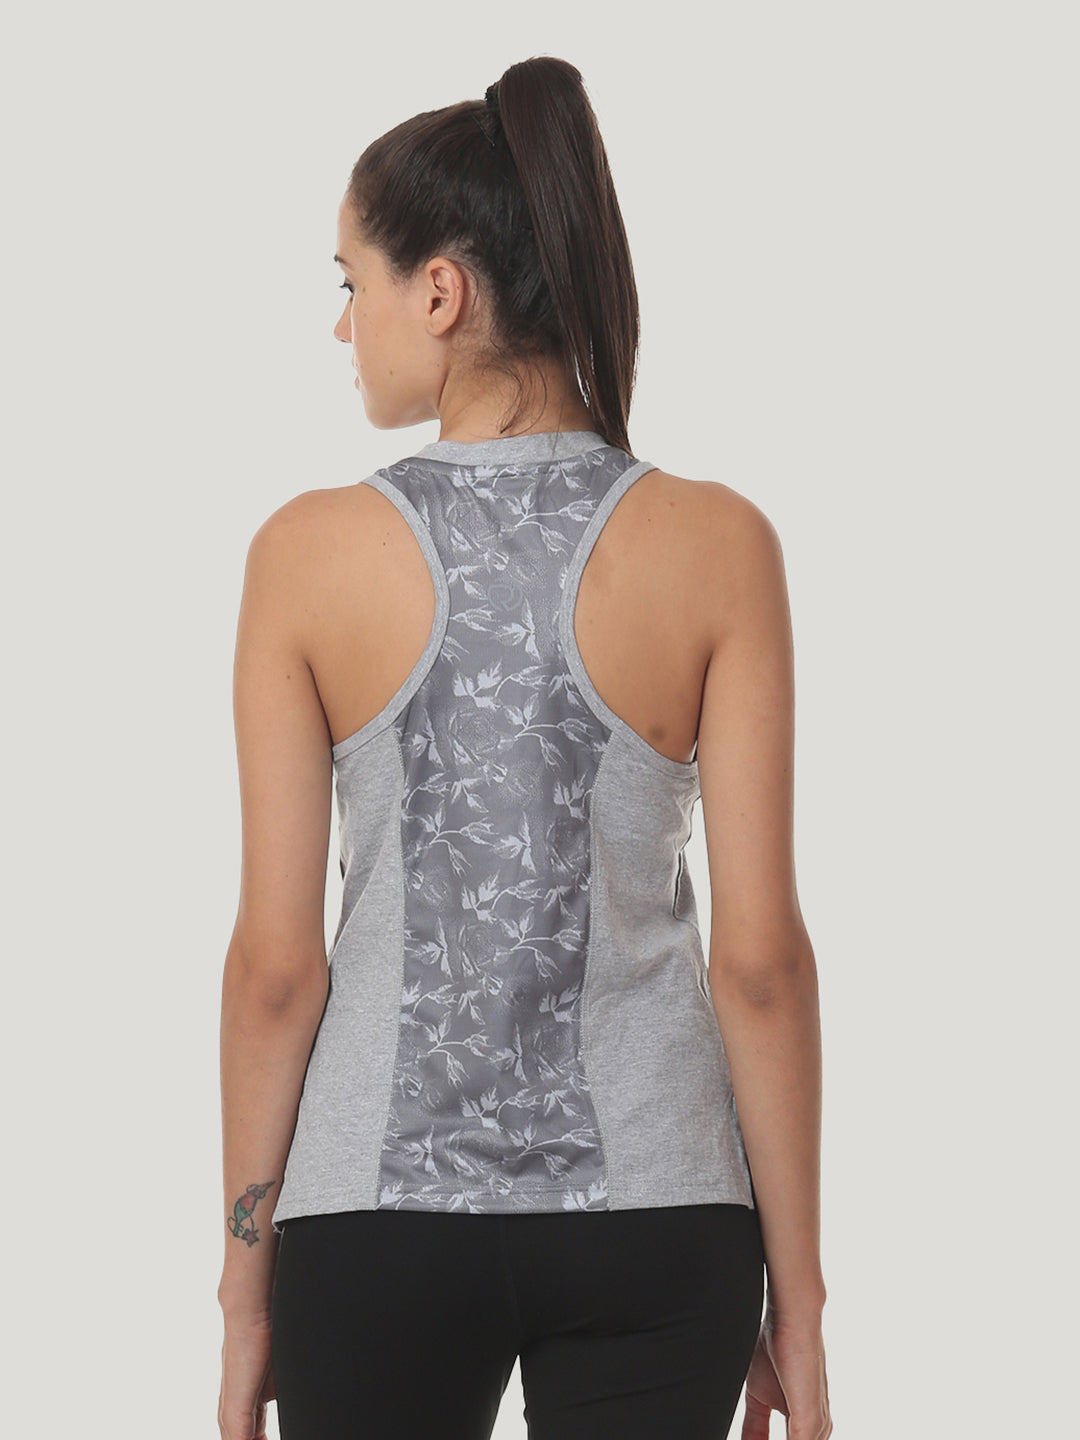 Gym & Training Tank Top Vest with Performance Mesh Back